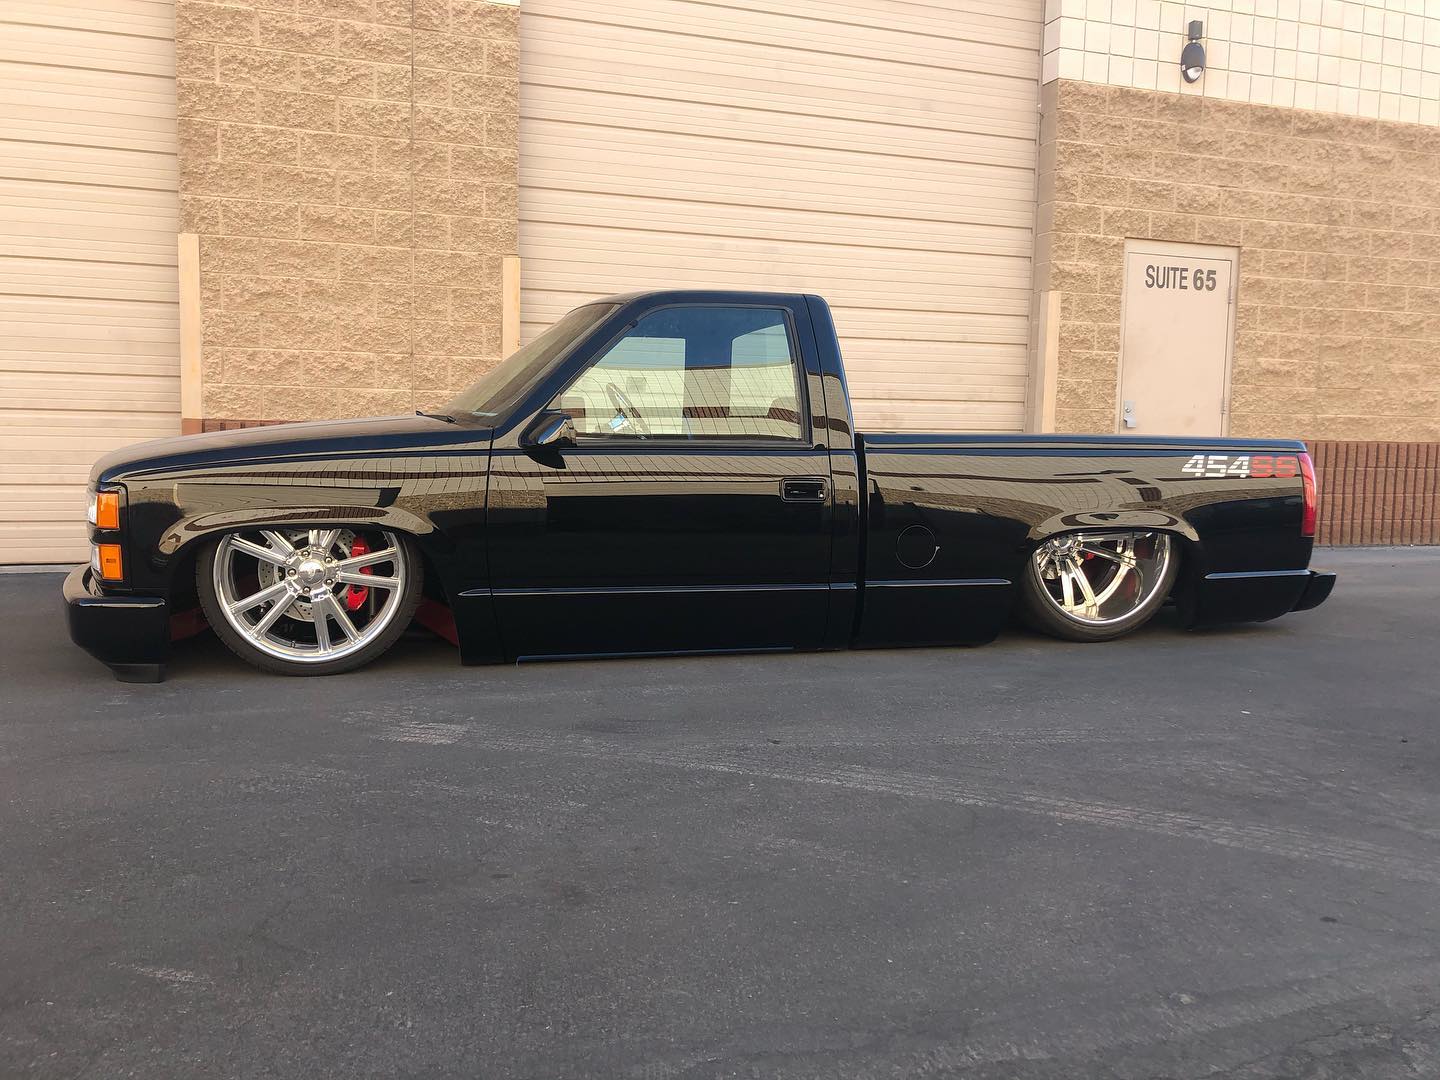 1990 Chevy 454ss Tre5 Customs CarBuff Network.